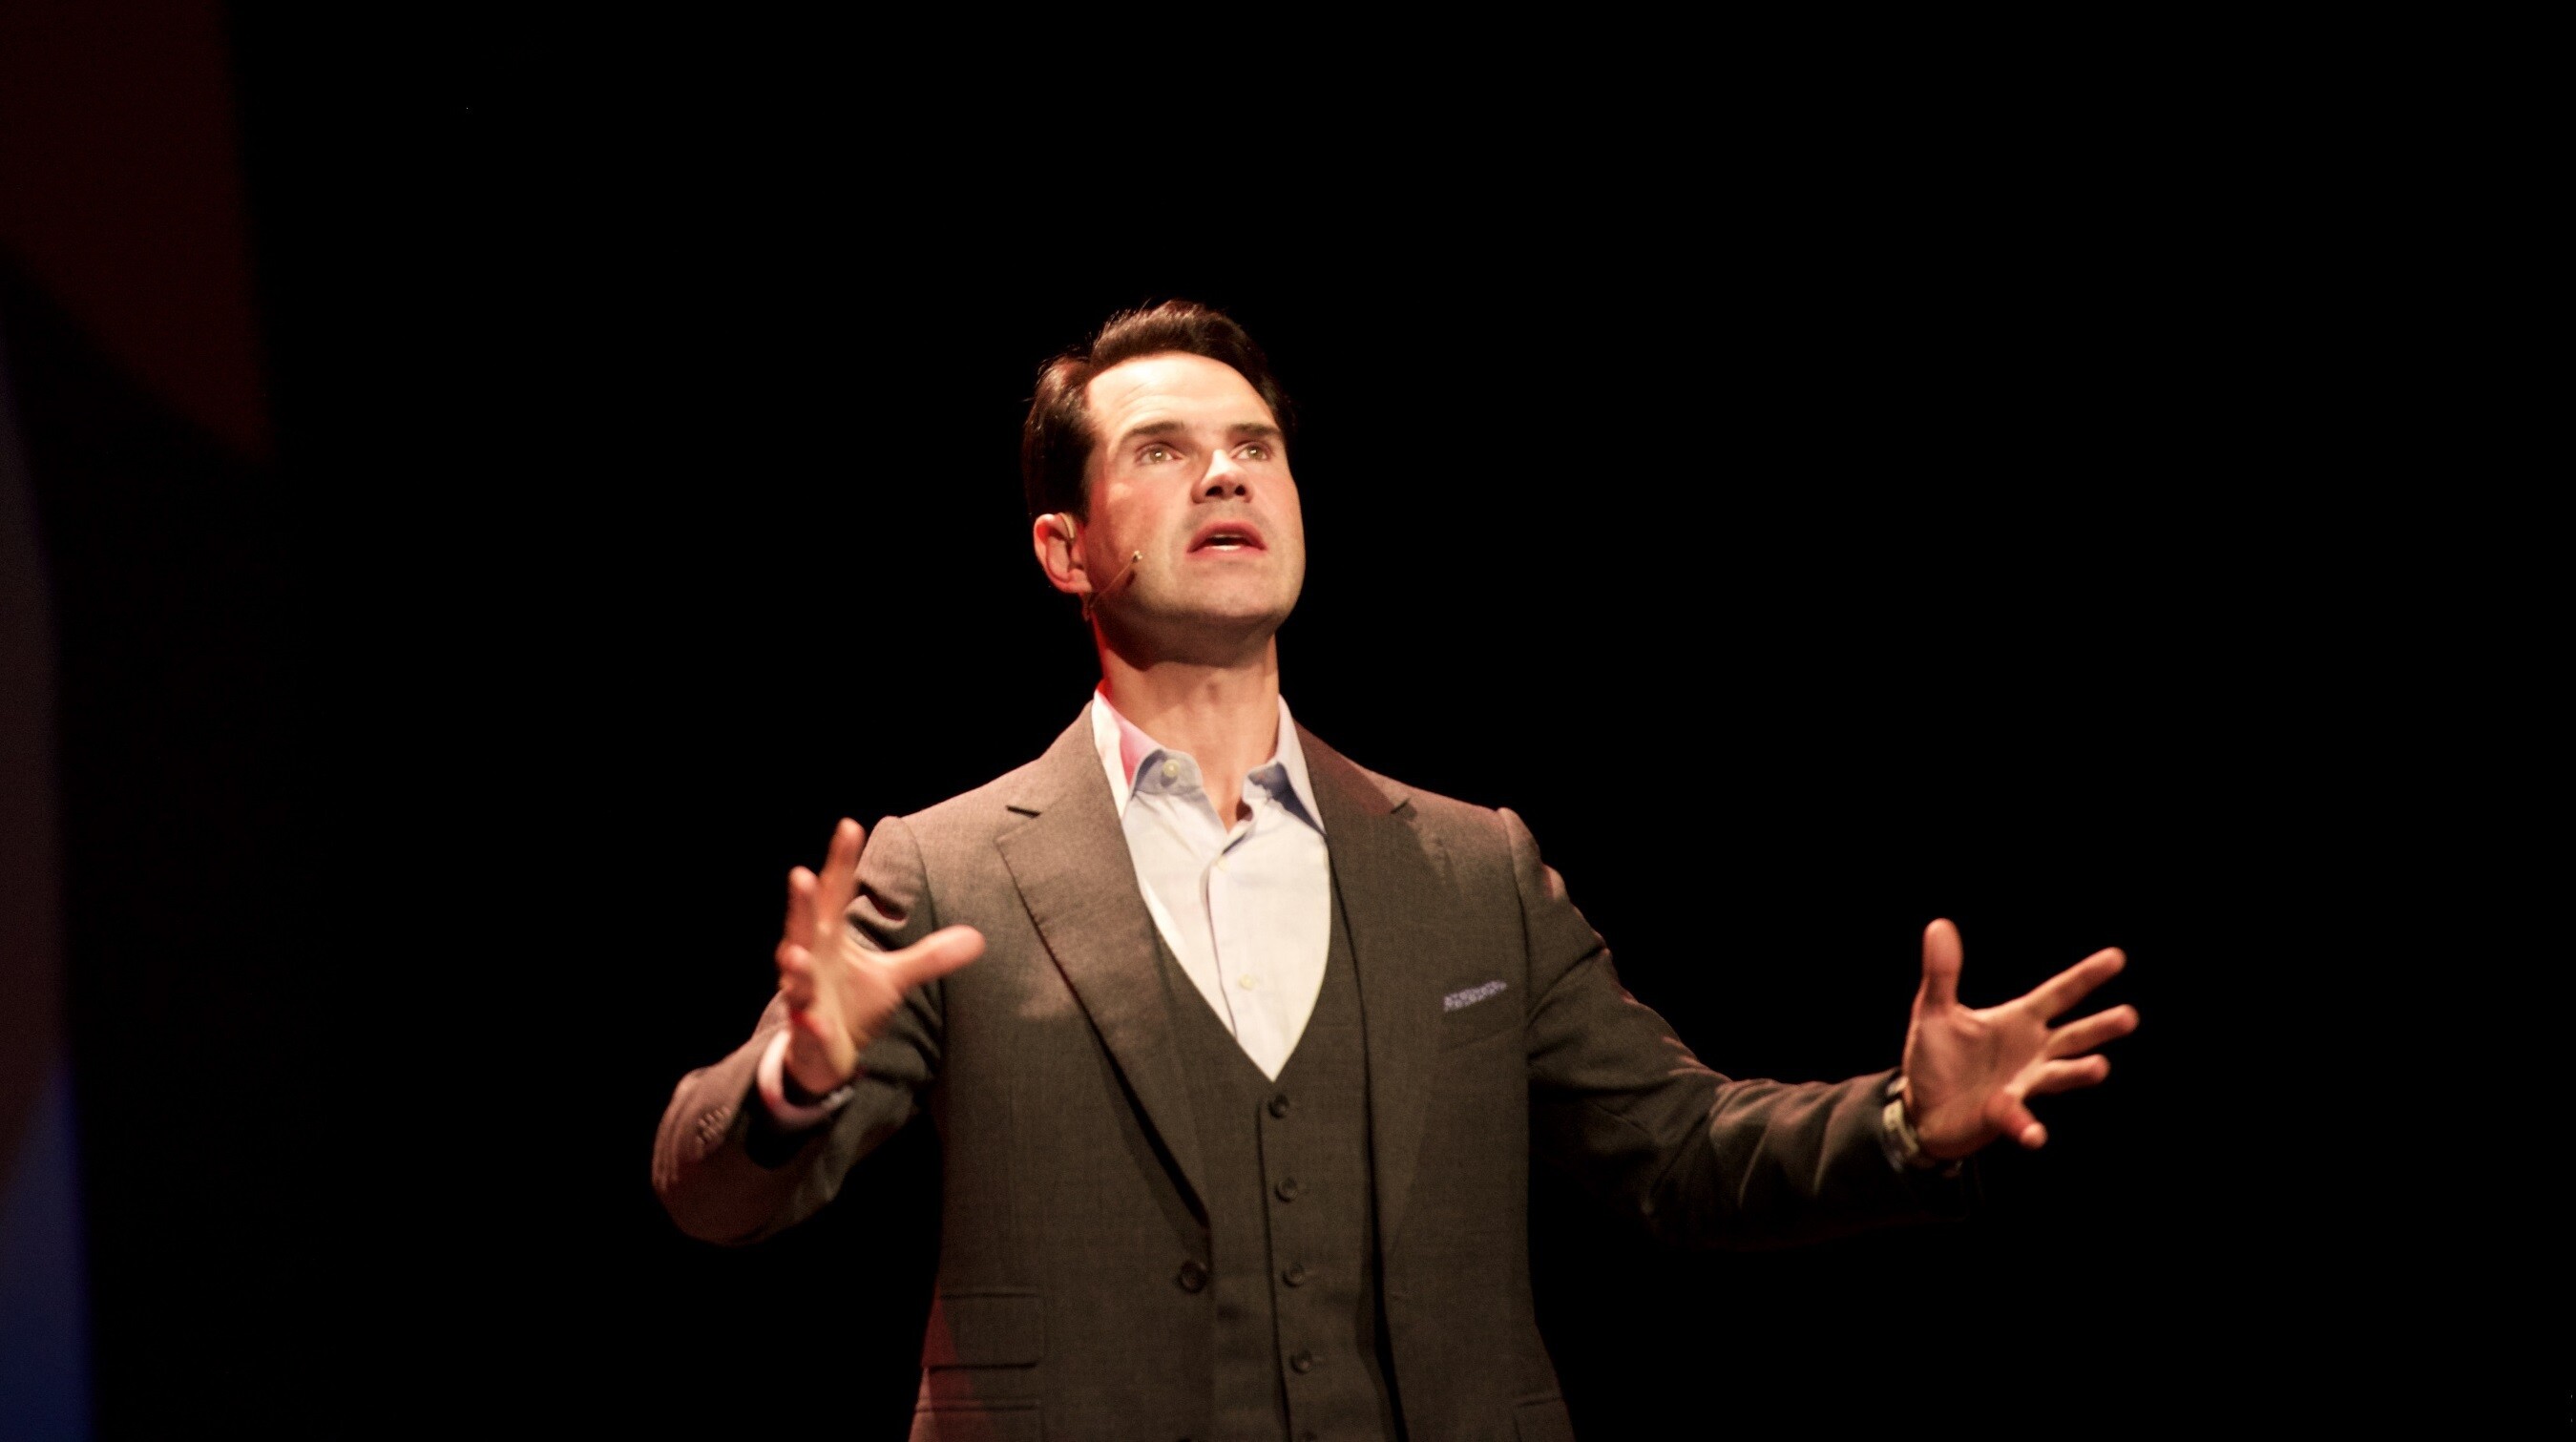 Jimmy Carr: 48-year-old comedian, Stage performance, Jimmy's brand-new show, Jokes about all kinds of things. 2700x1520 HD Background.